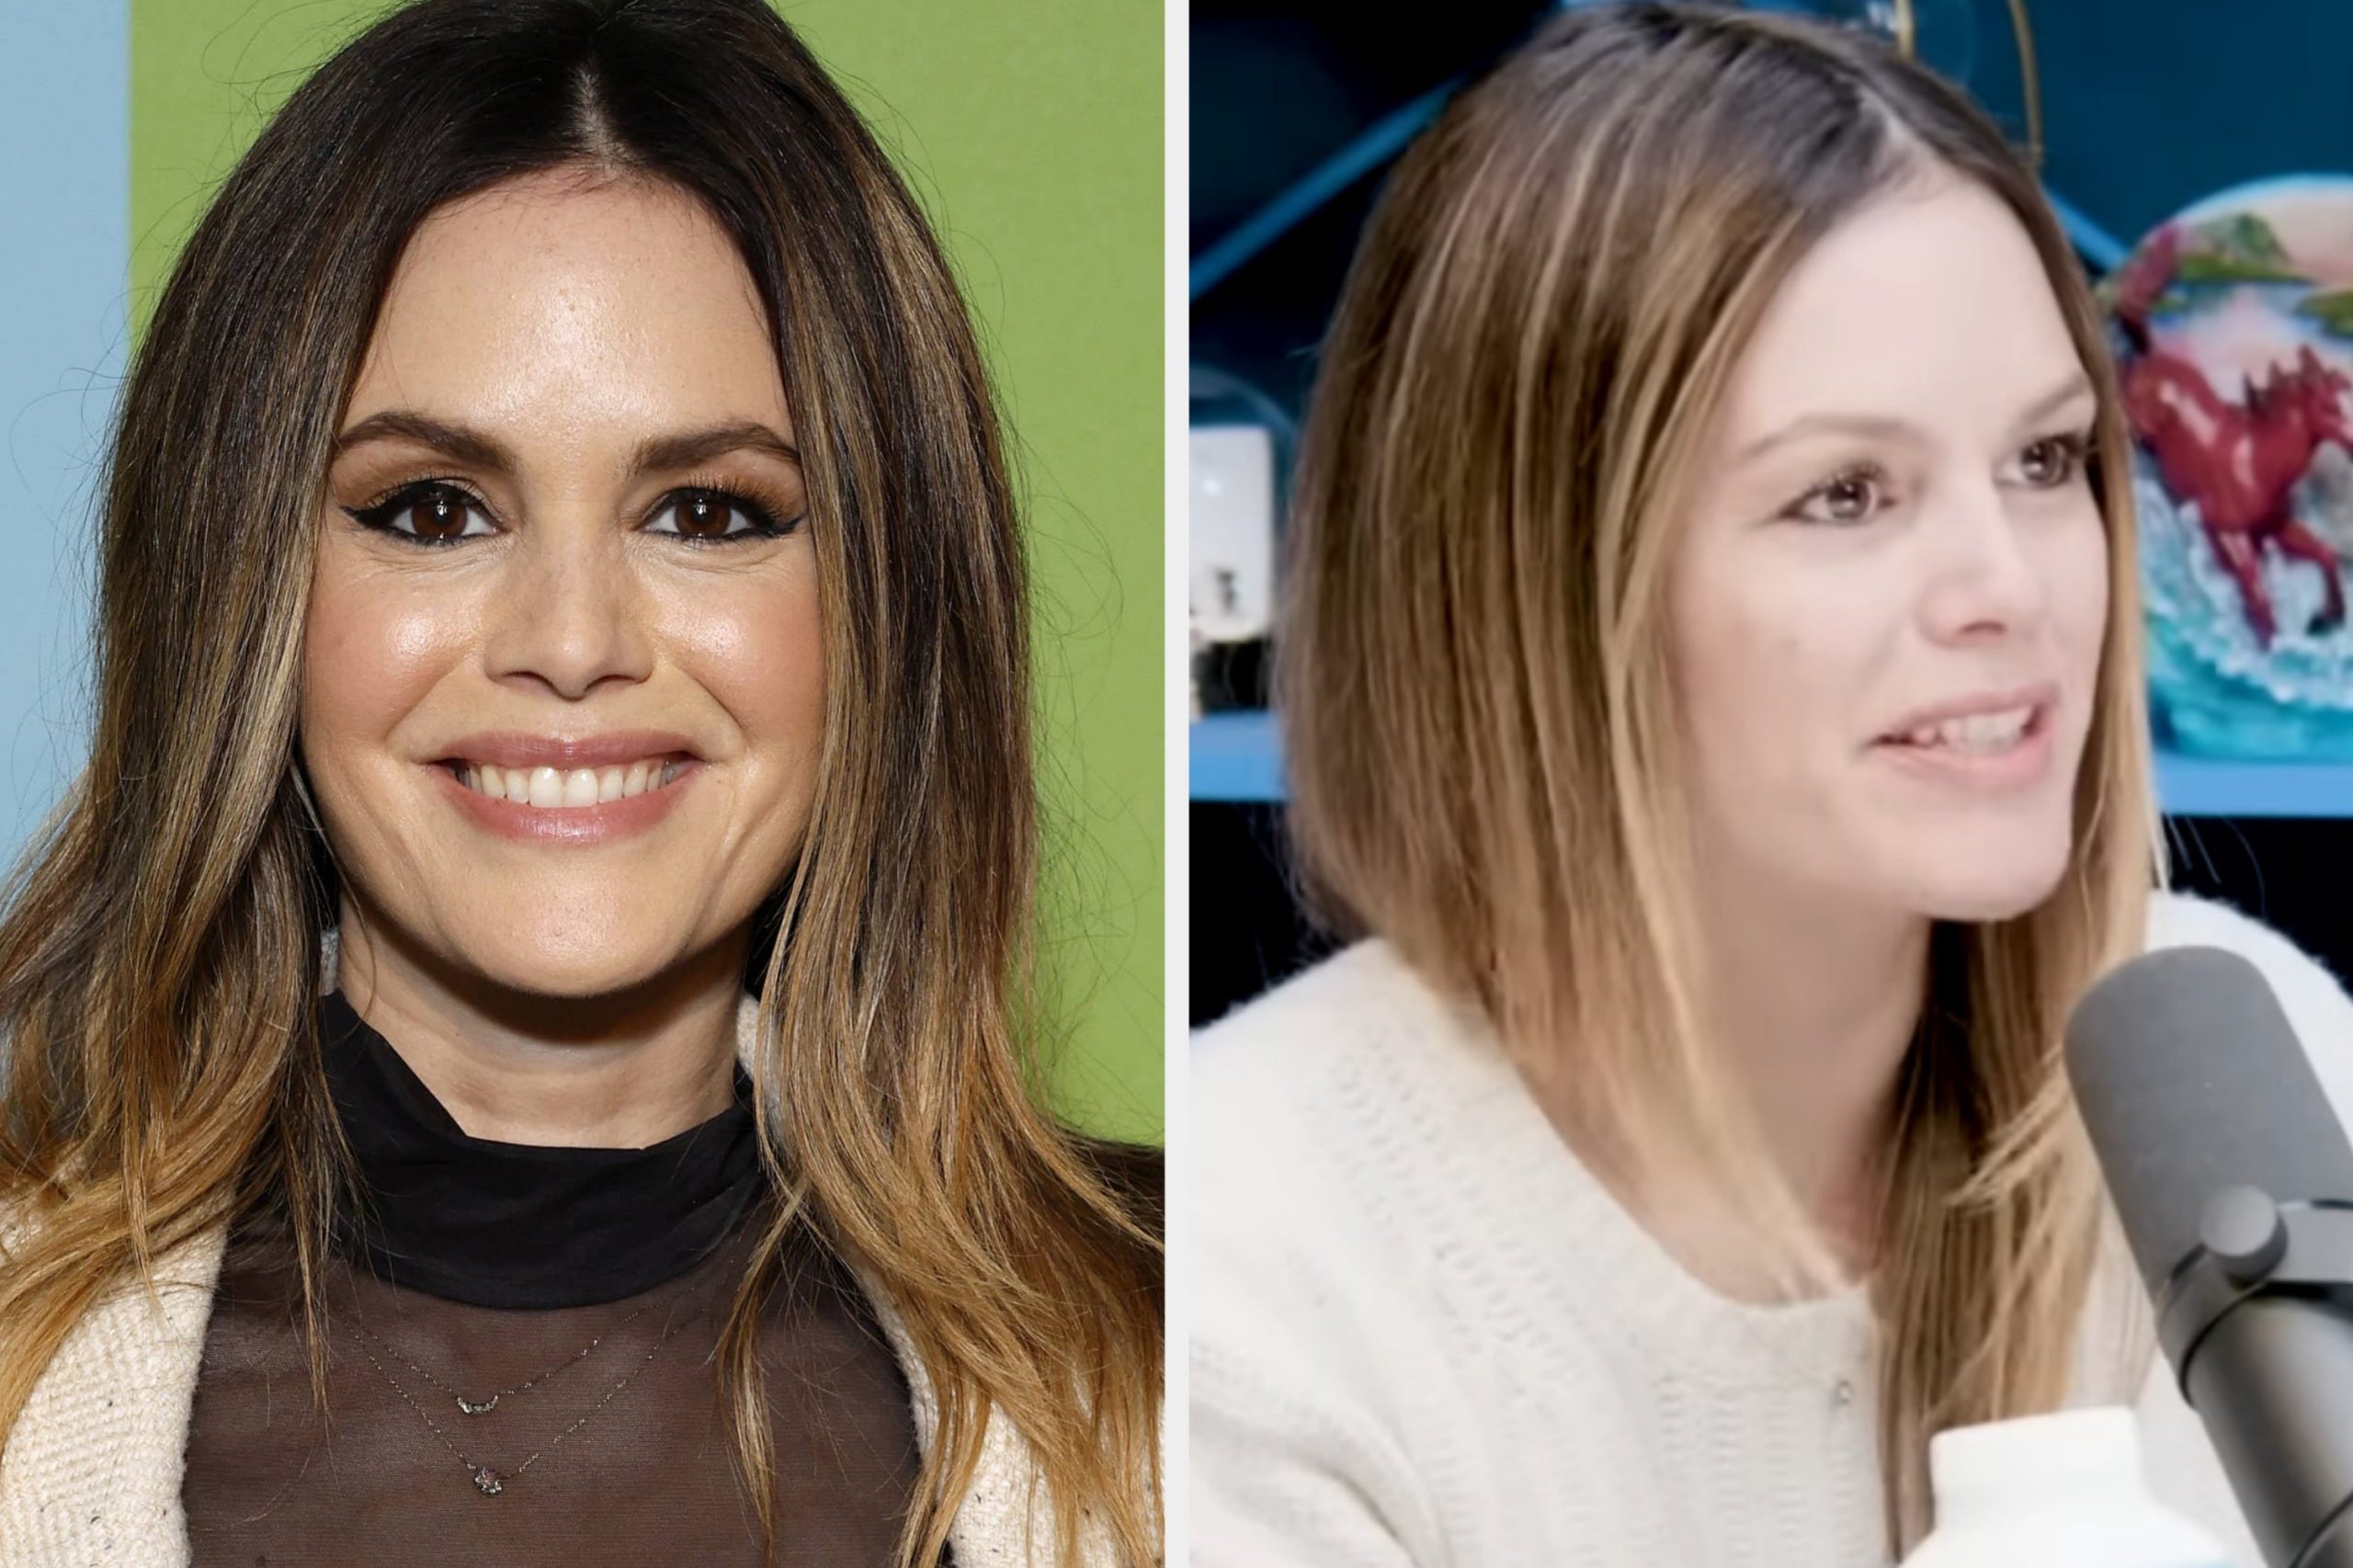 Rachel Bilson Revealed She Was Fired From A Job Because She Spoke “Candidly And Openly” About Being “Manhandled” During Sex